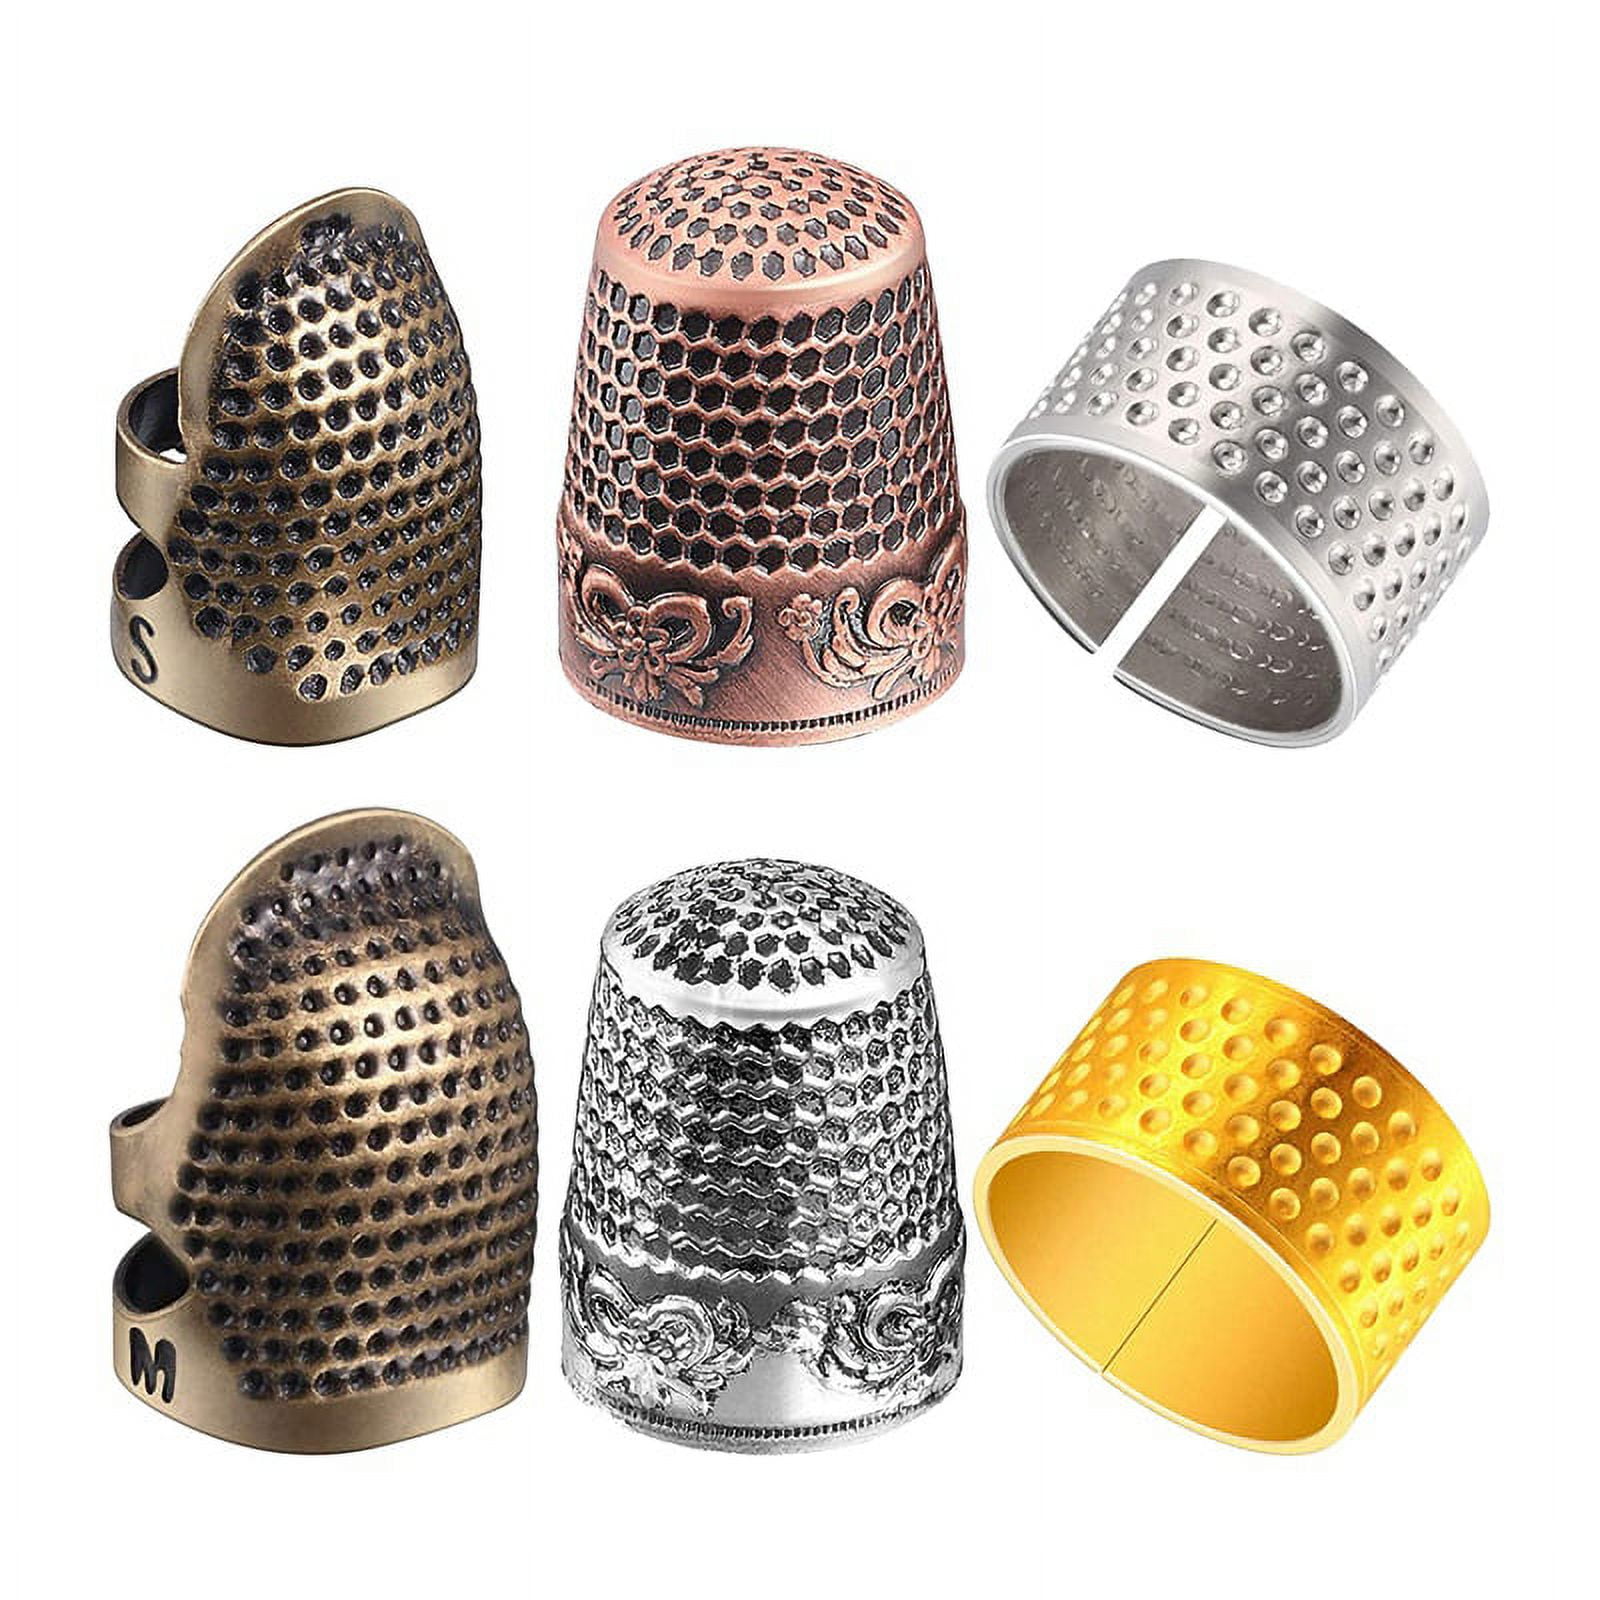 6 Pack Sewing Thimble Finger Protector, Adjustable Finger Metal Shield Protector Pin Needles Sewing Quilting Craft Accessories(2 Sizes)